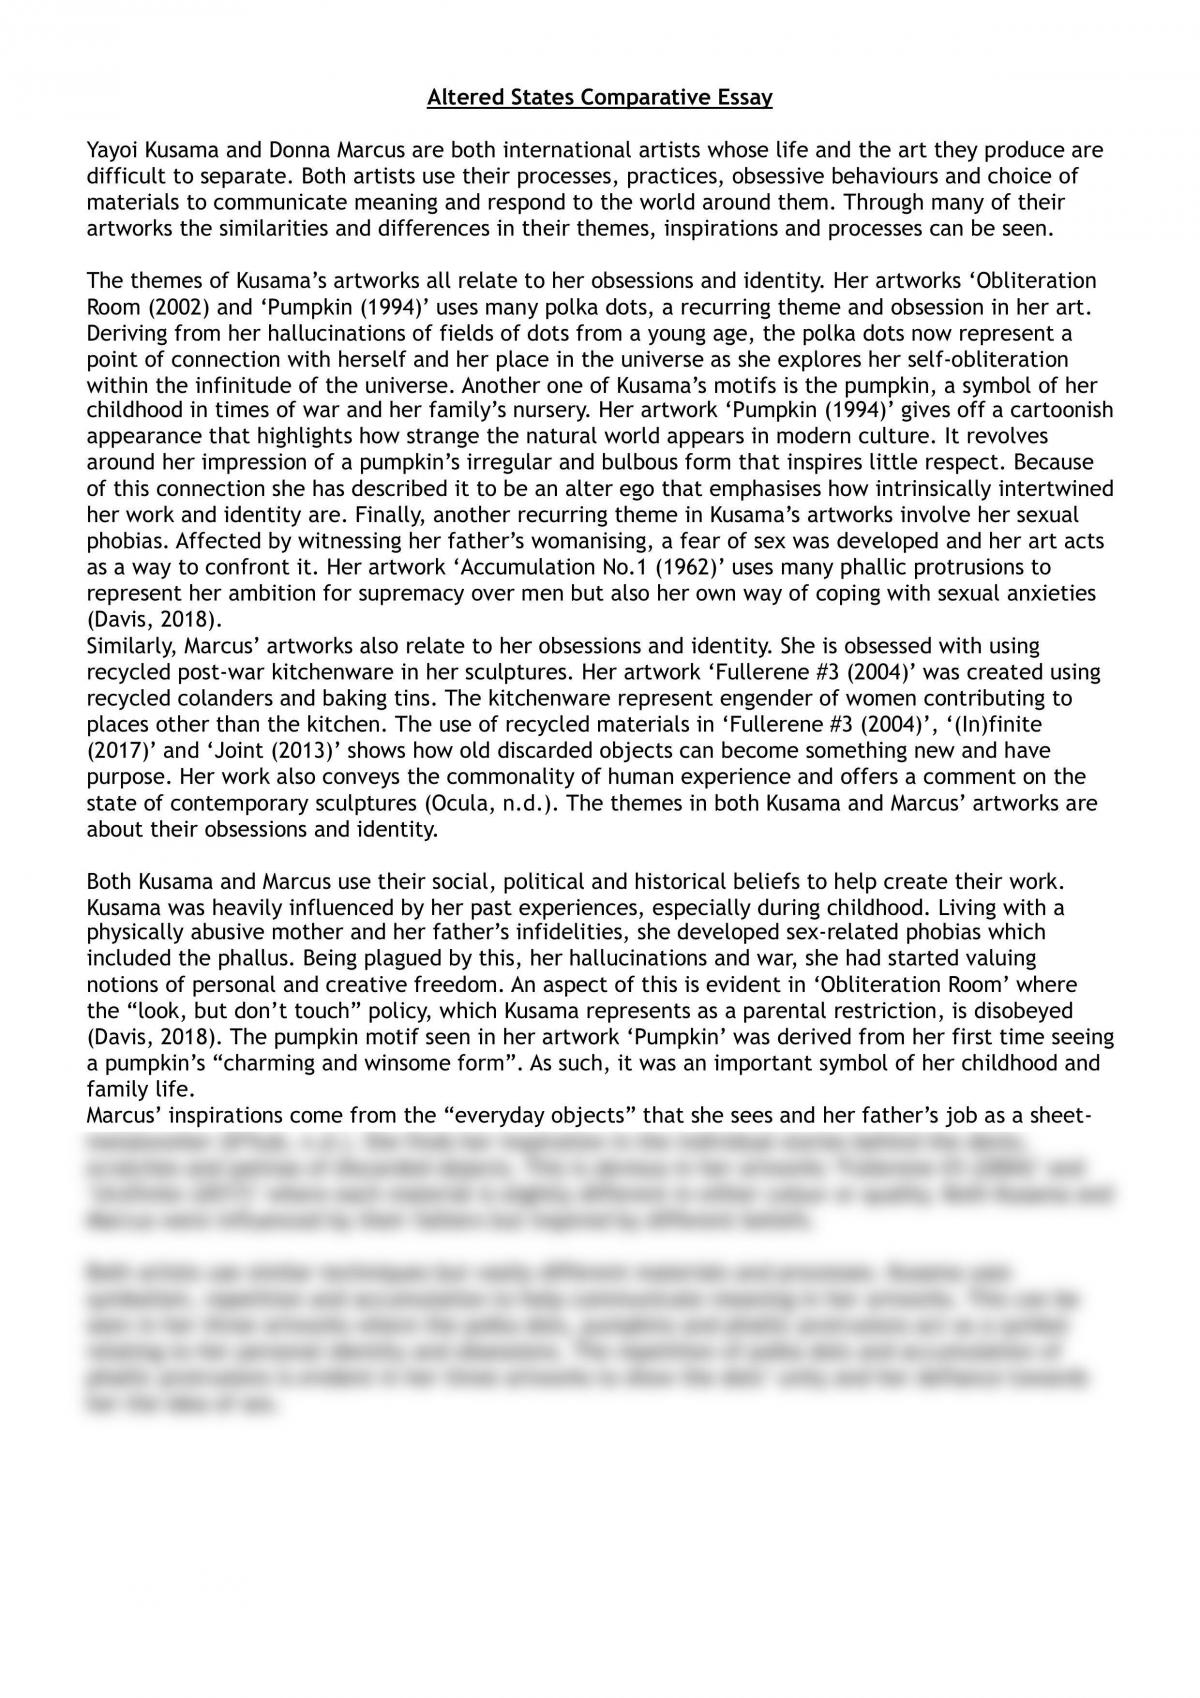 Altered States Comparative Essay - Page 1